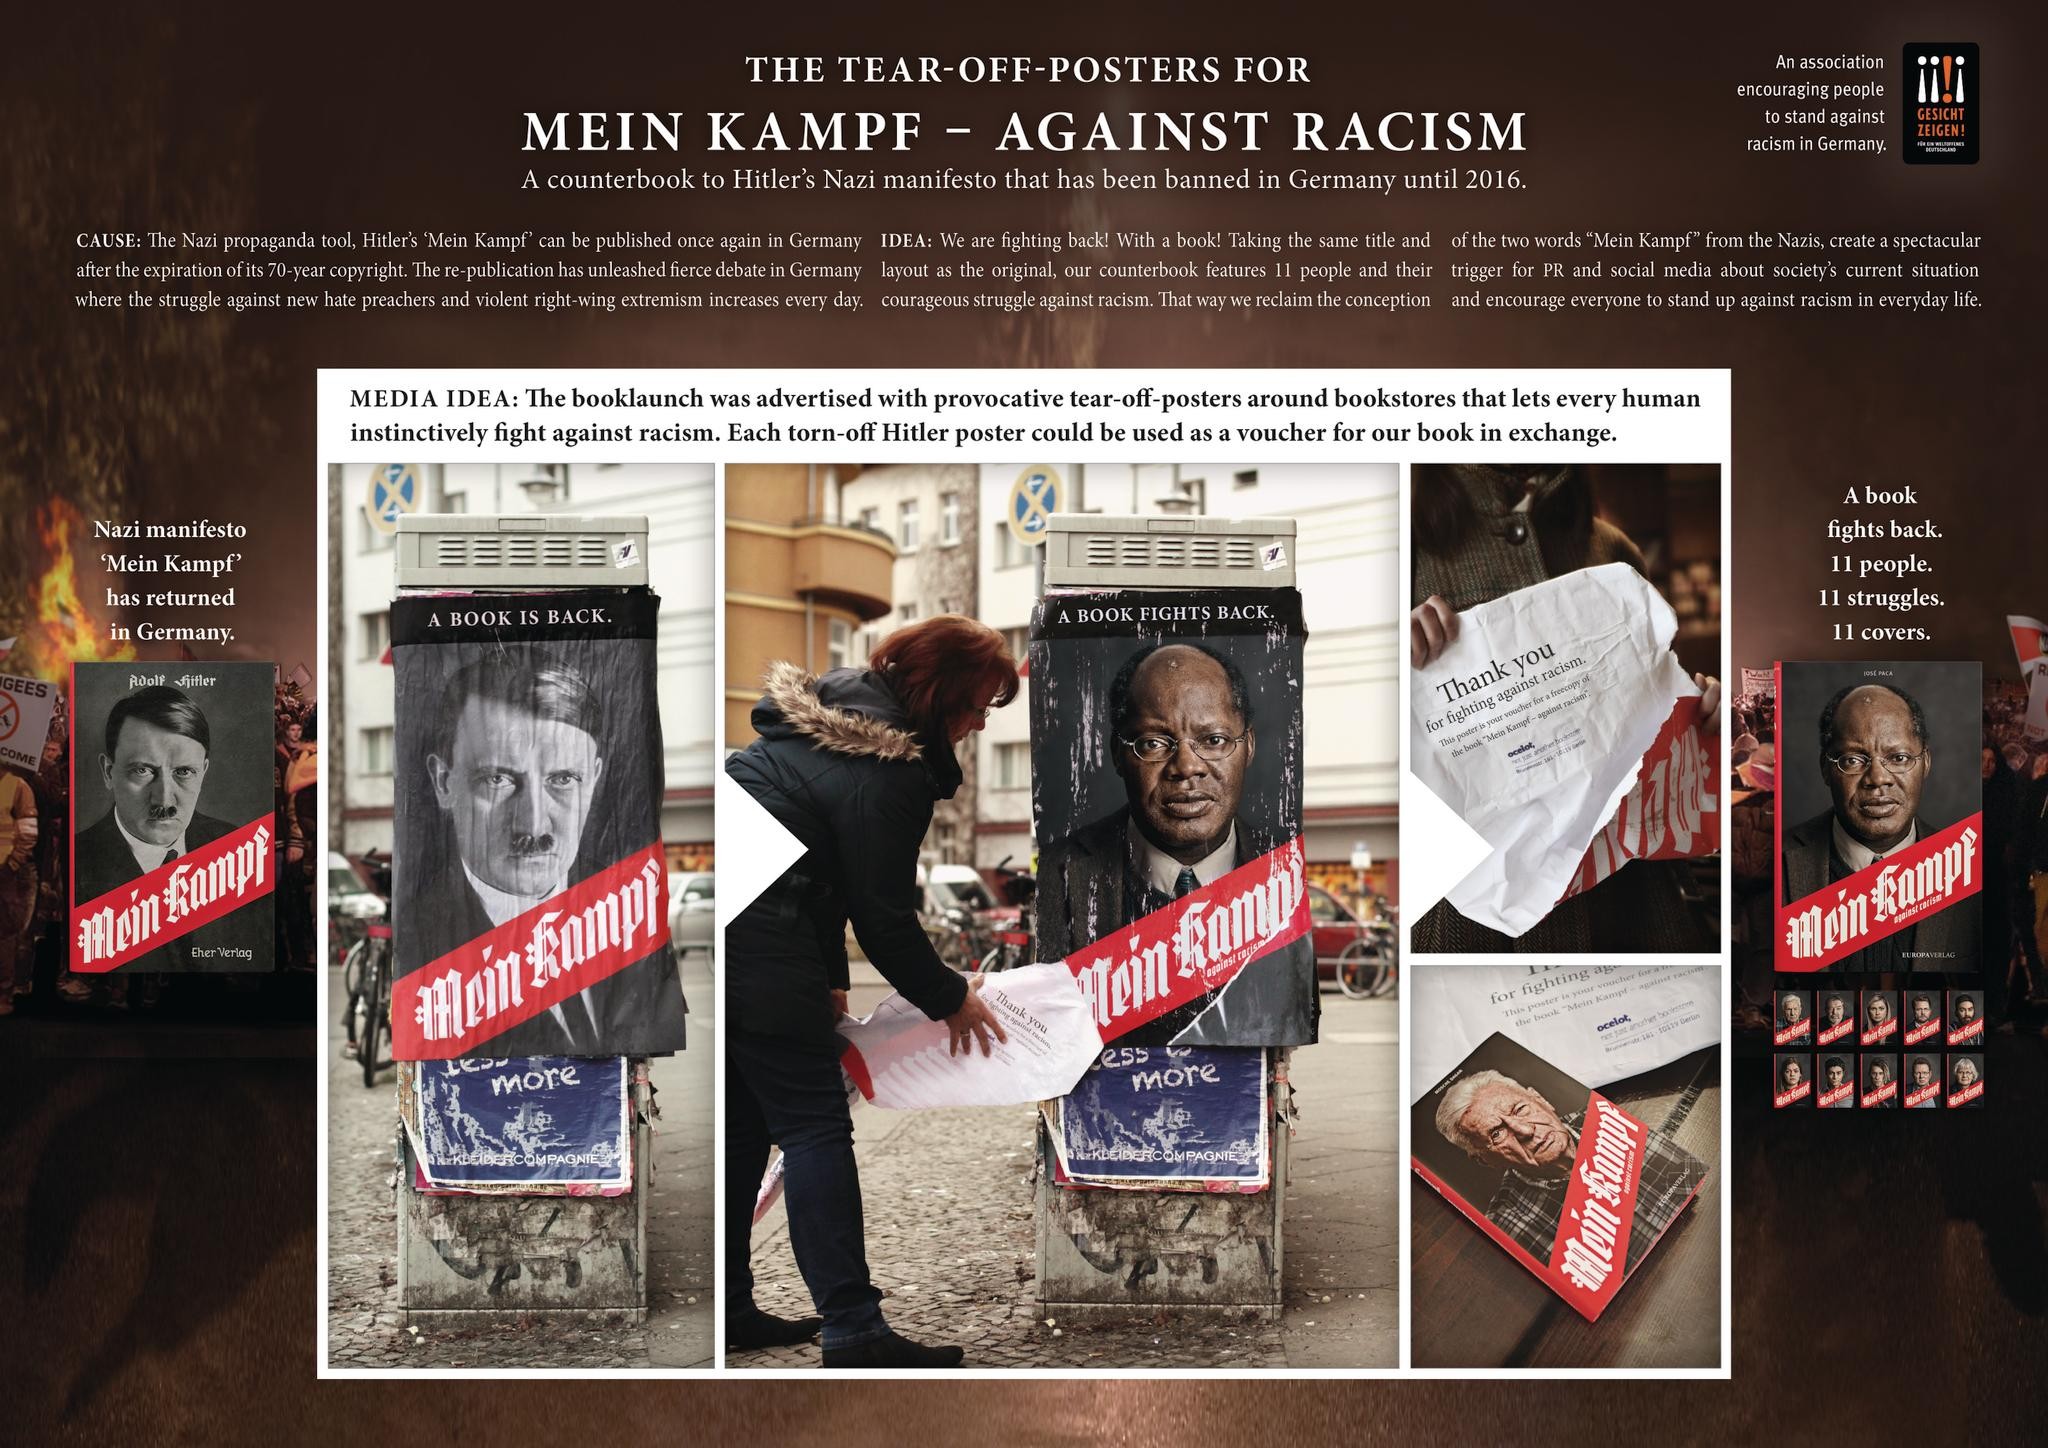 The tear-off-posters for "Mein Kampf - against racism"